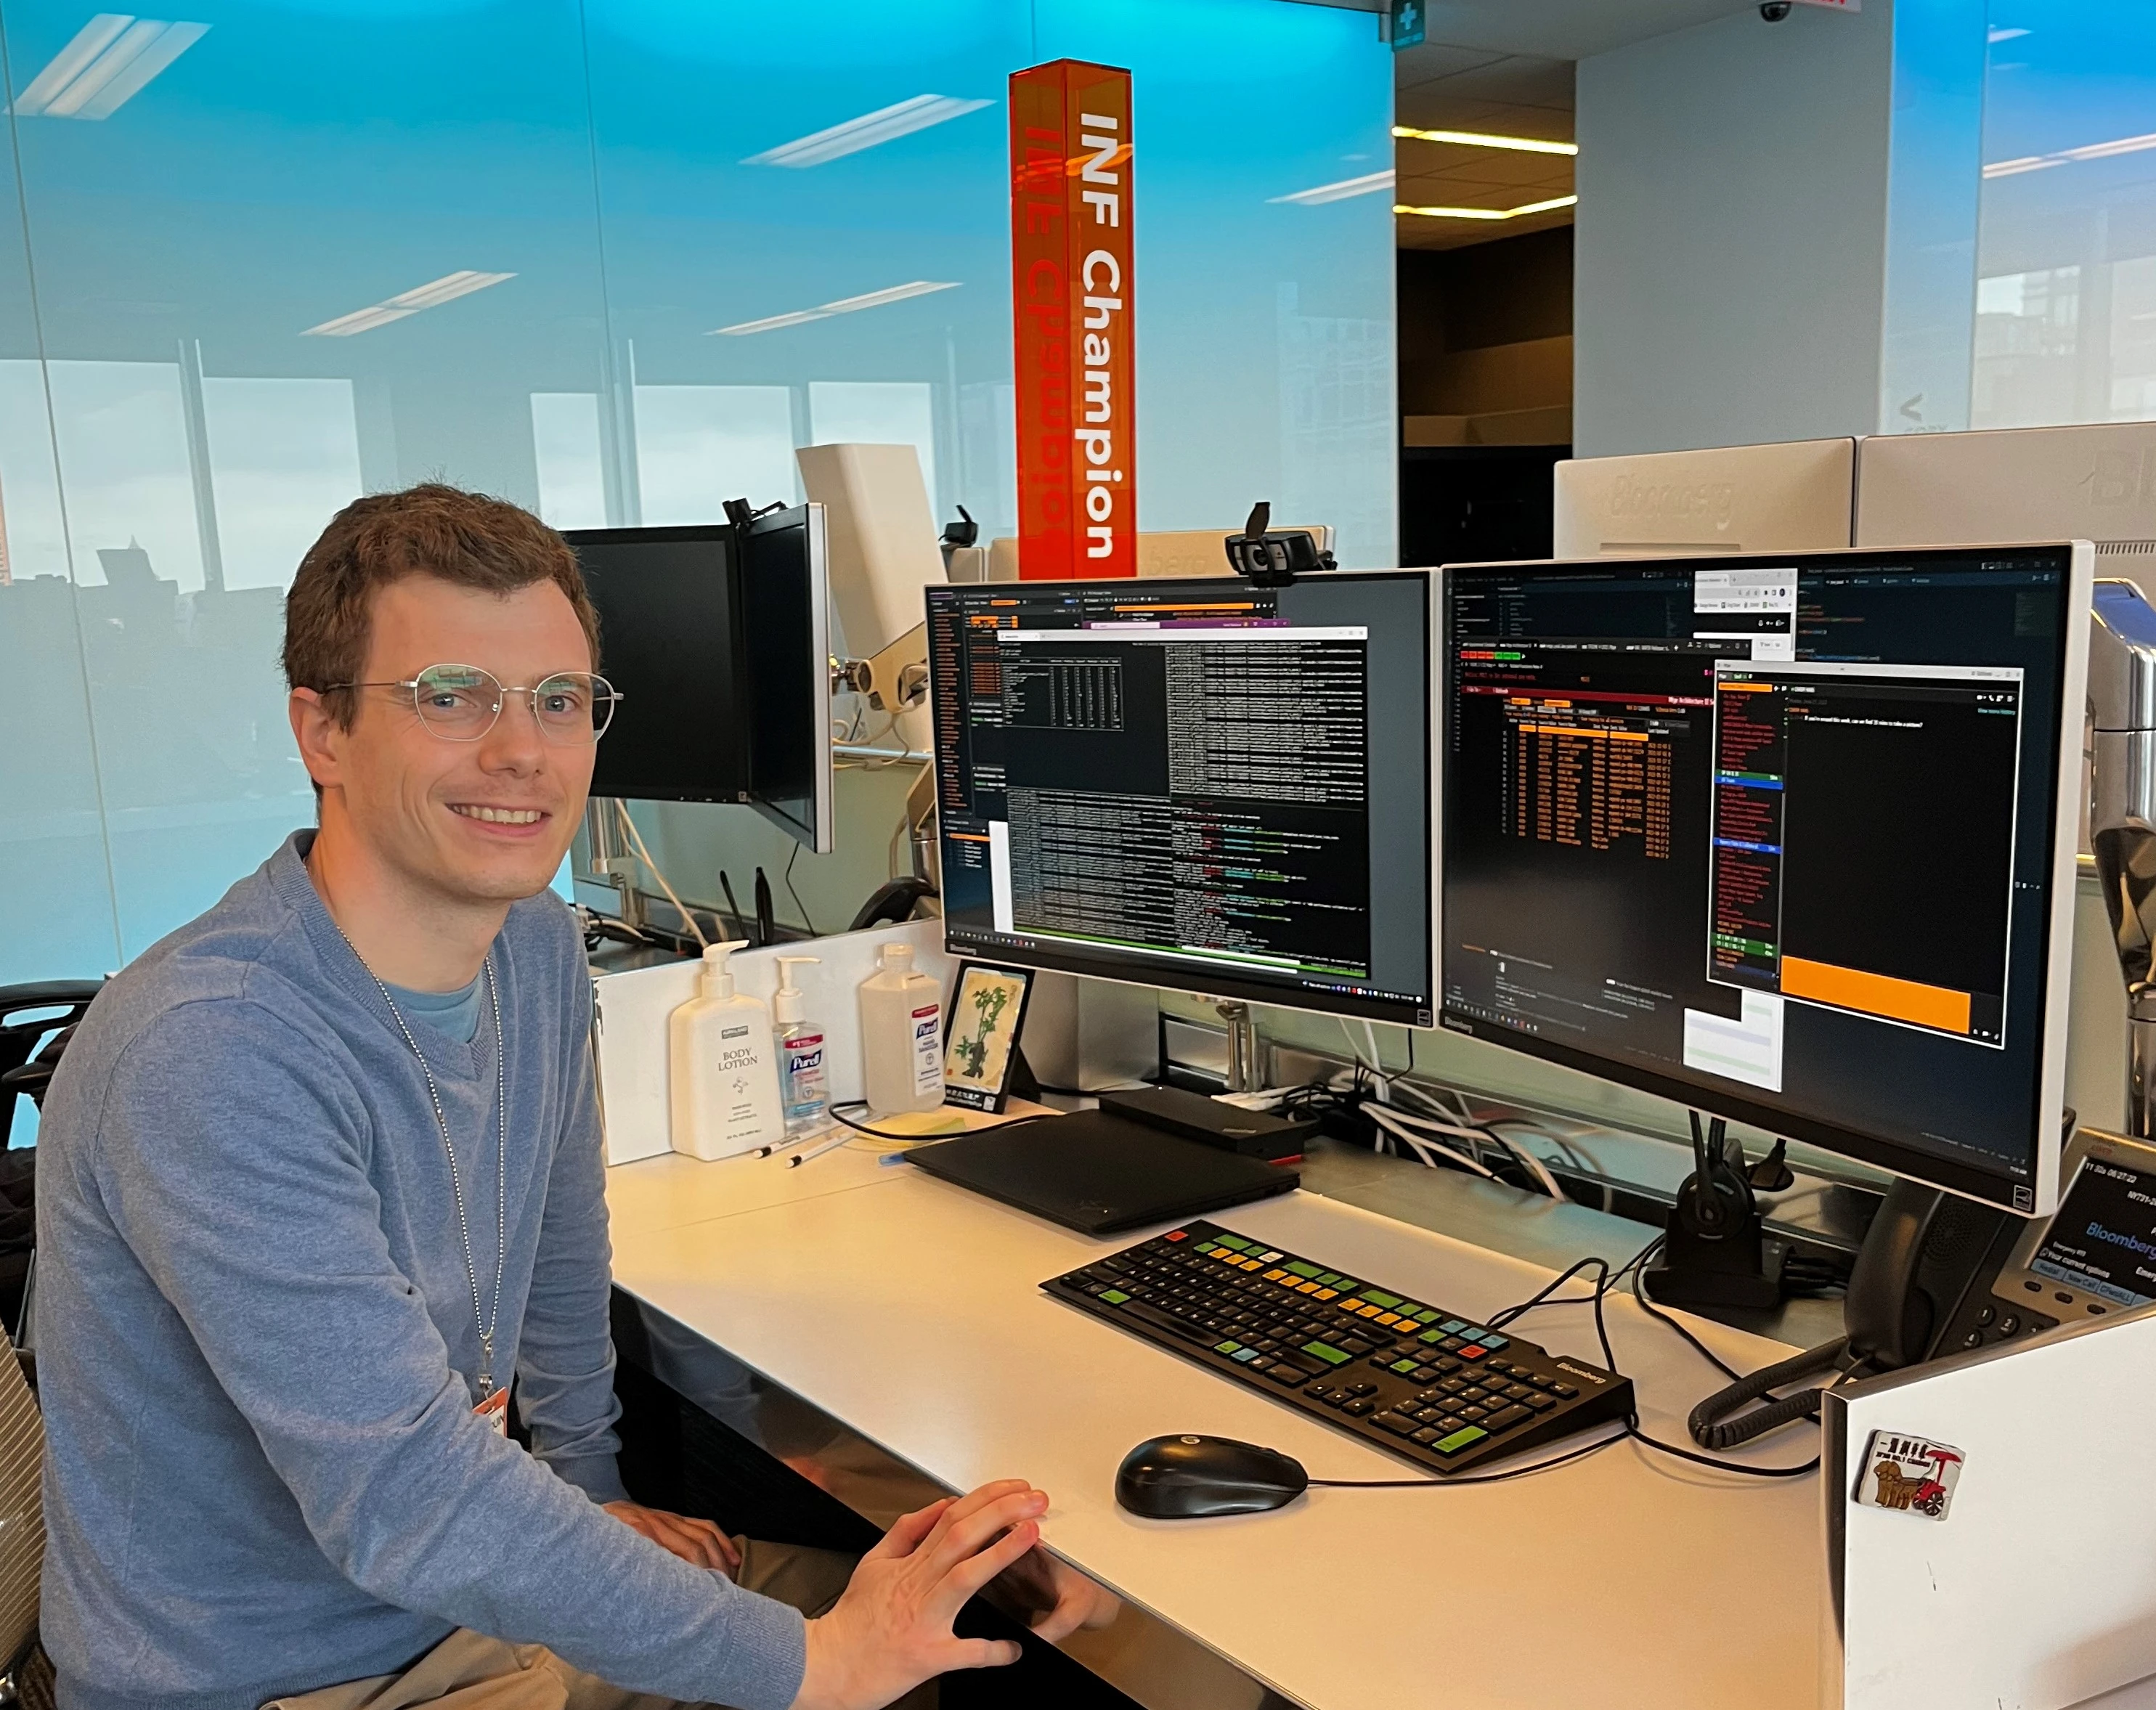 Baudouin Giard seated in front of his computer screens at his desk in the Bloomberg office